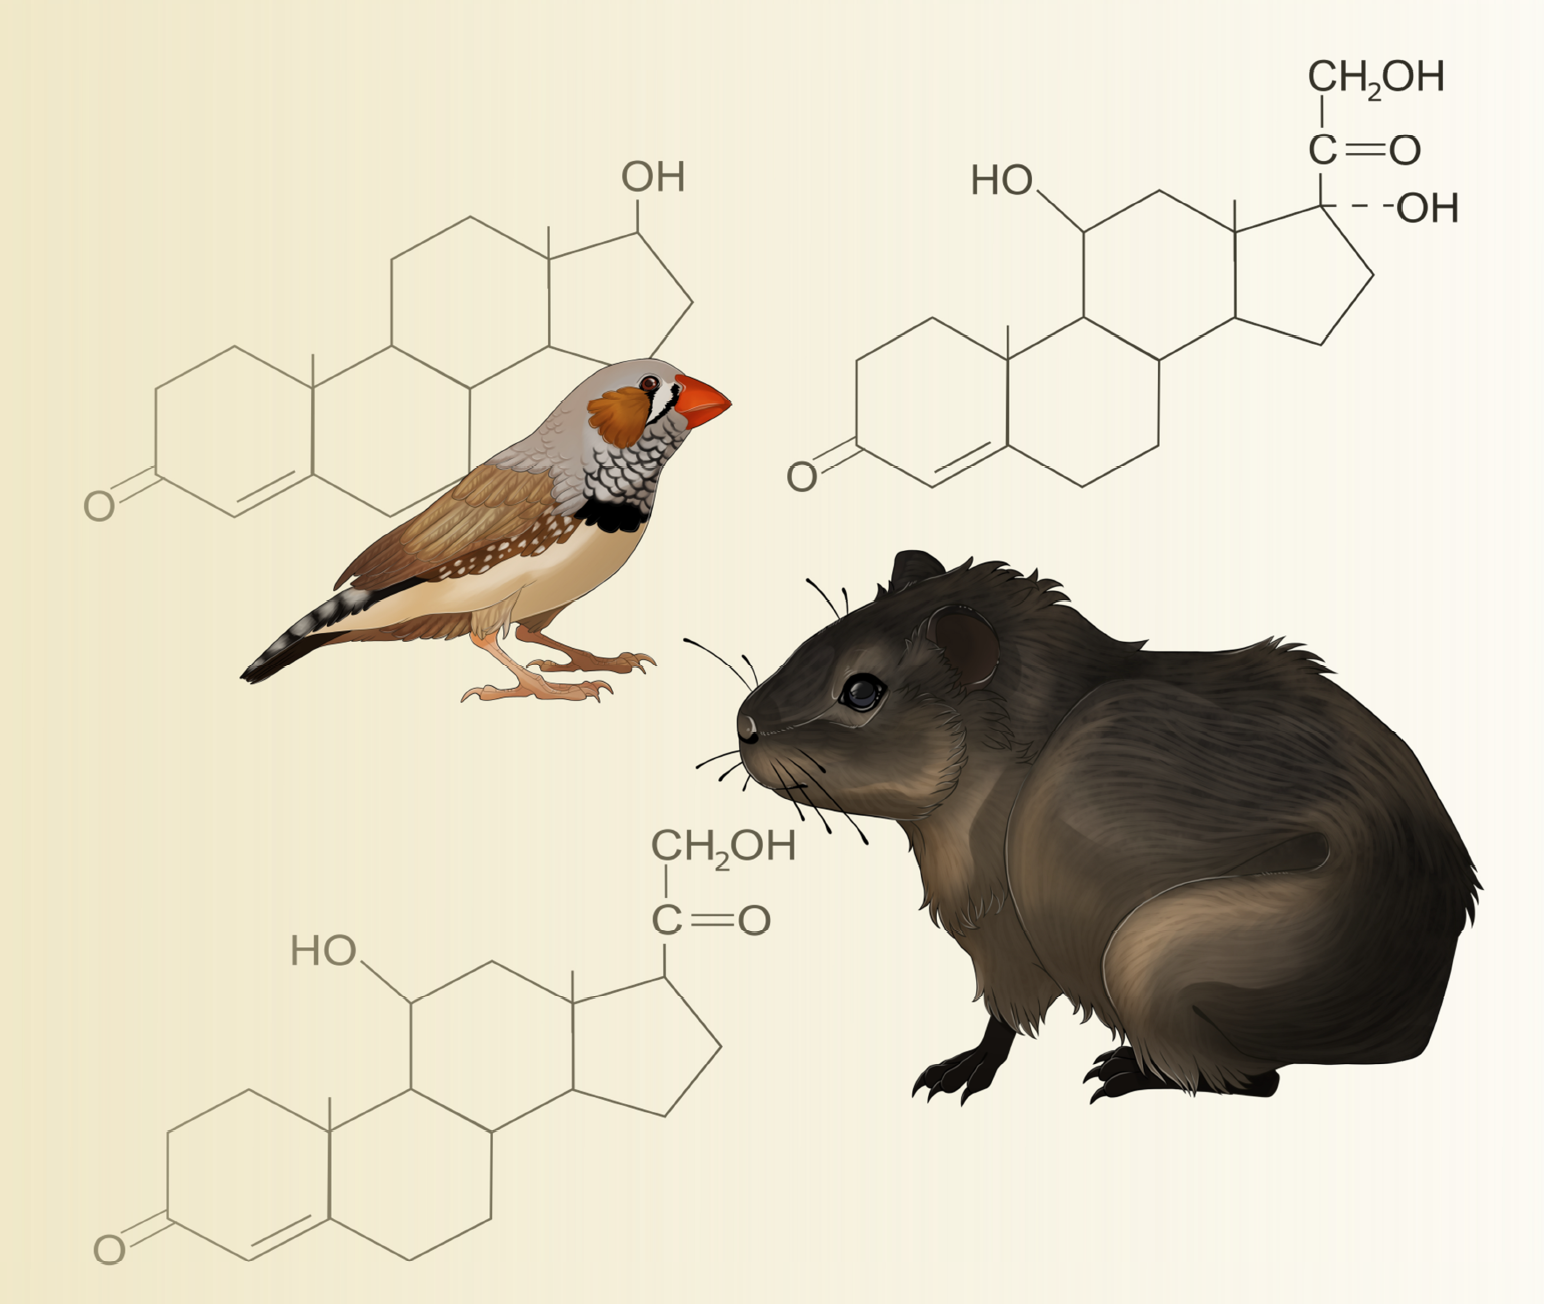 a drwaing of a zebra finch and a cavy and the structural formula of hormoes in the background